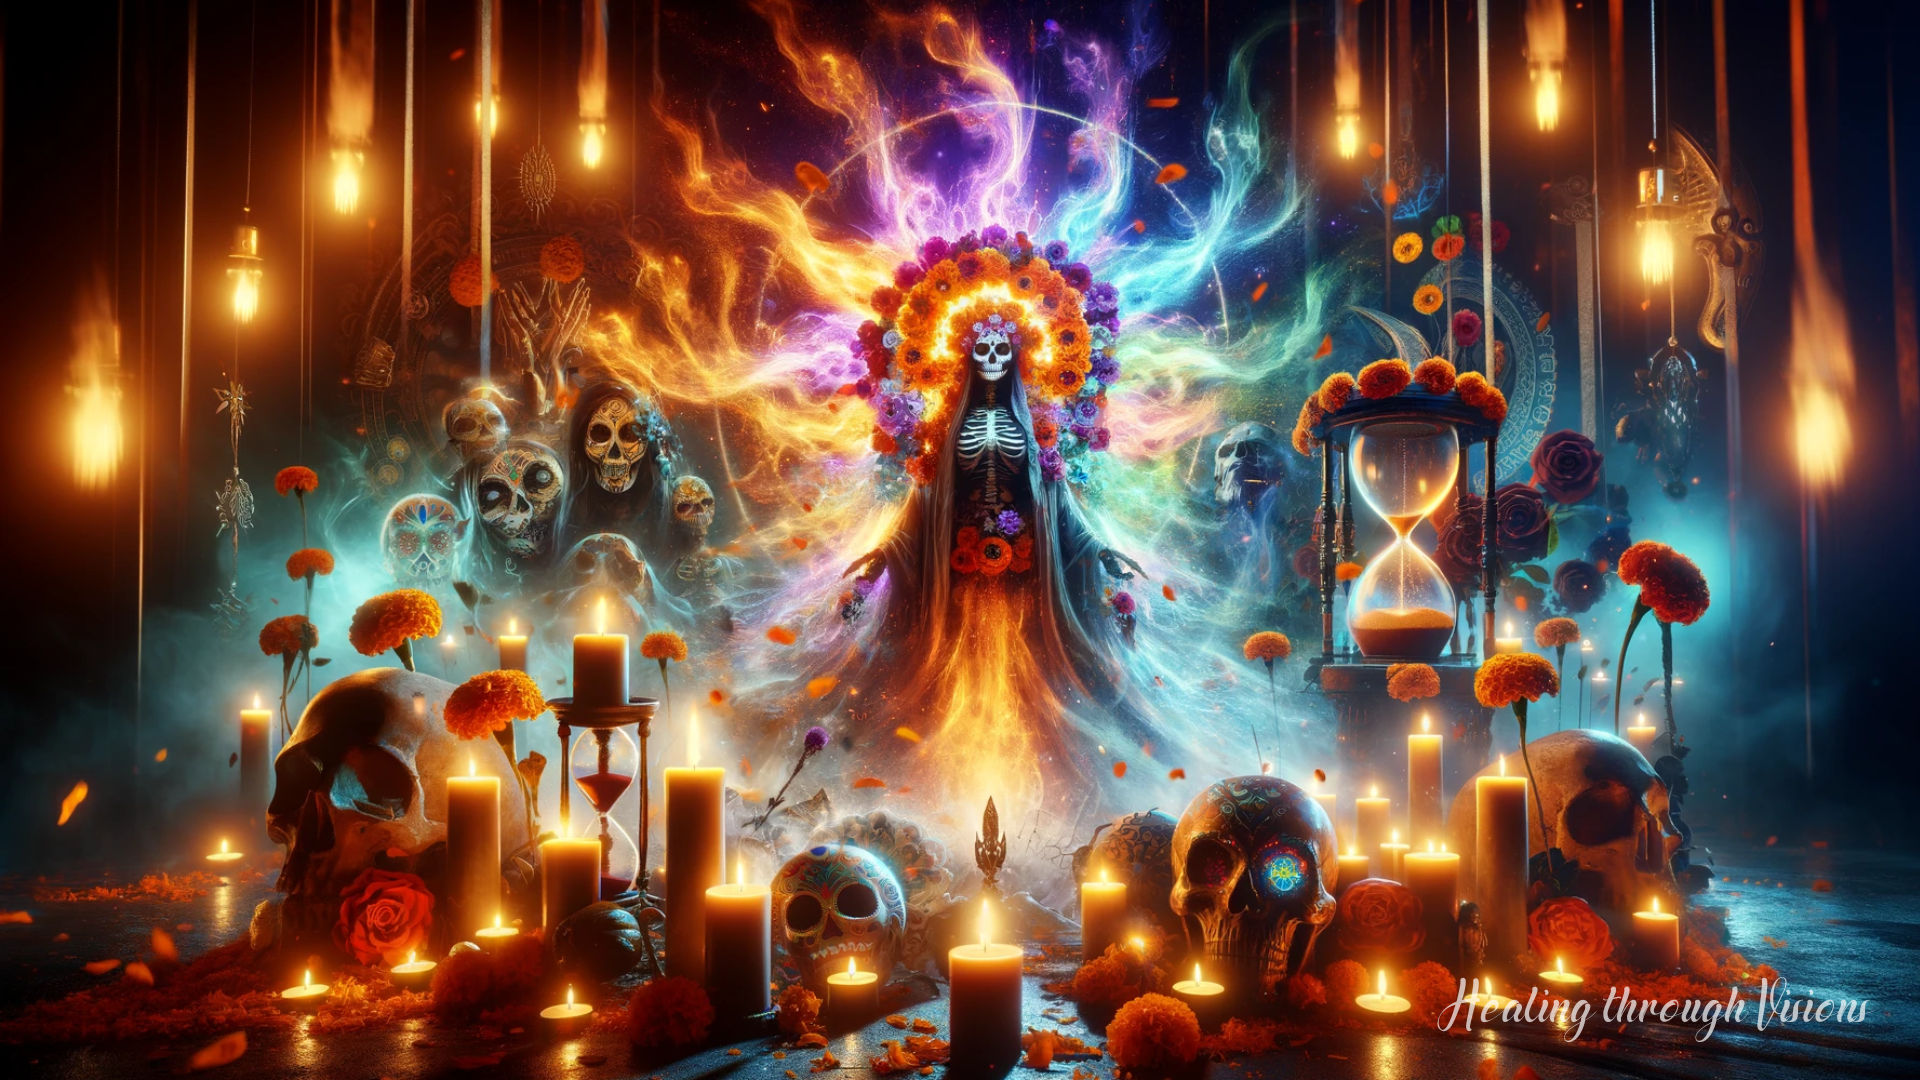 A dramatic and powerful image capturing the essence of Santa Muerte, filled with vibrant colors representing her different lights. The scene is set in a mystical, candle-lit space adorned with symbols like marigolds, skulls, and an hourglass. In the center, a majestic figure of Santa Muerte stands, emanating an aura of empowerment and love, surrounded by a captivating atmosphere that blends realism with theatrical and cinematic elements.